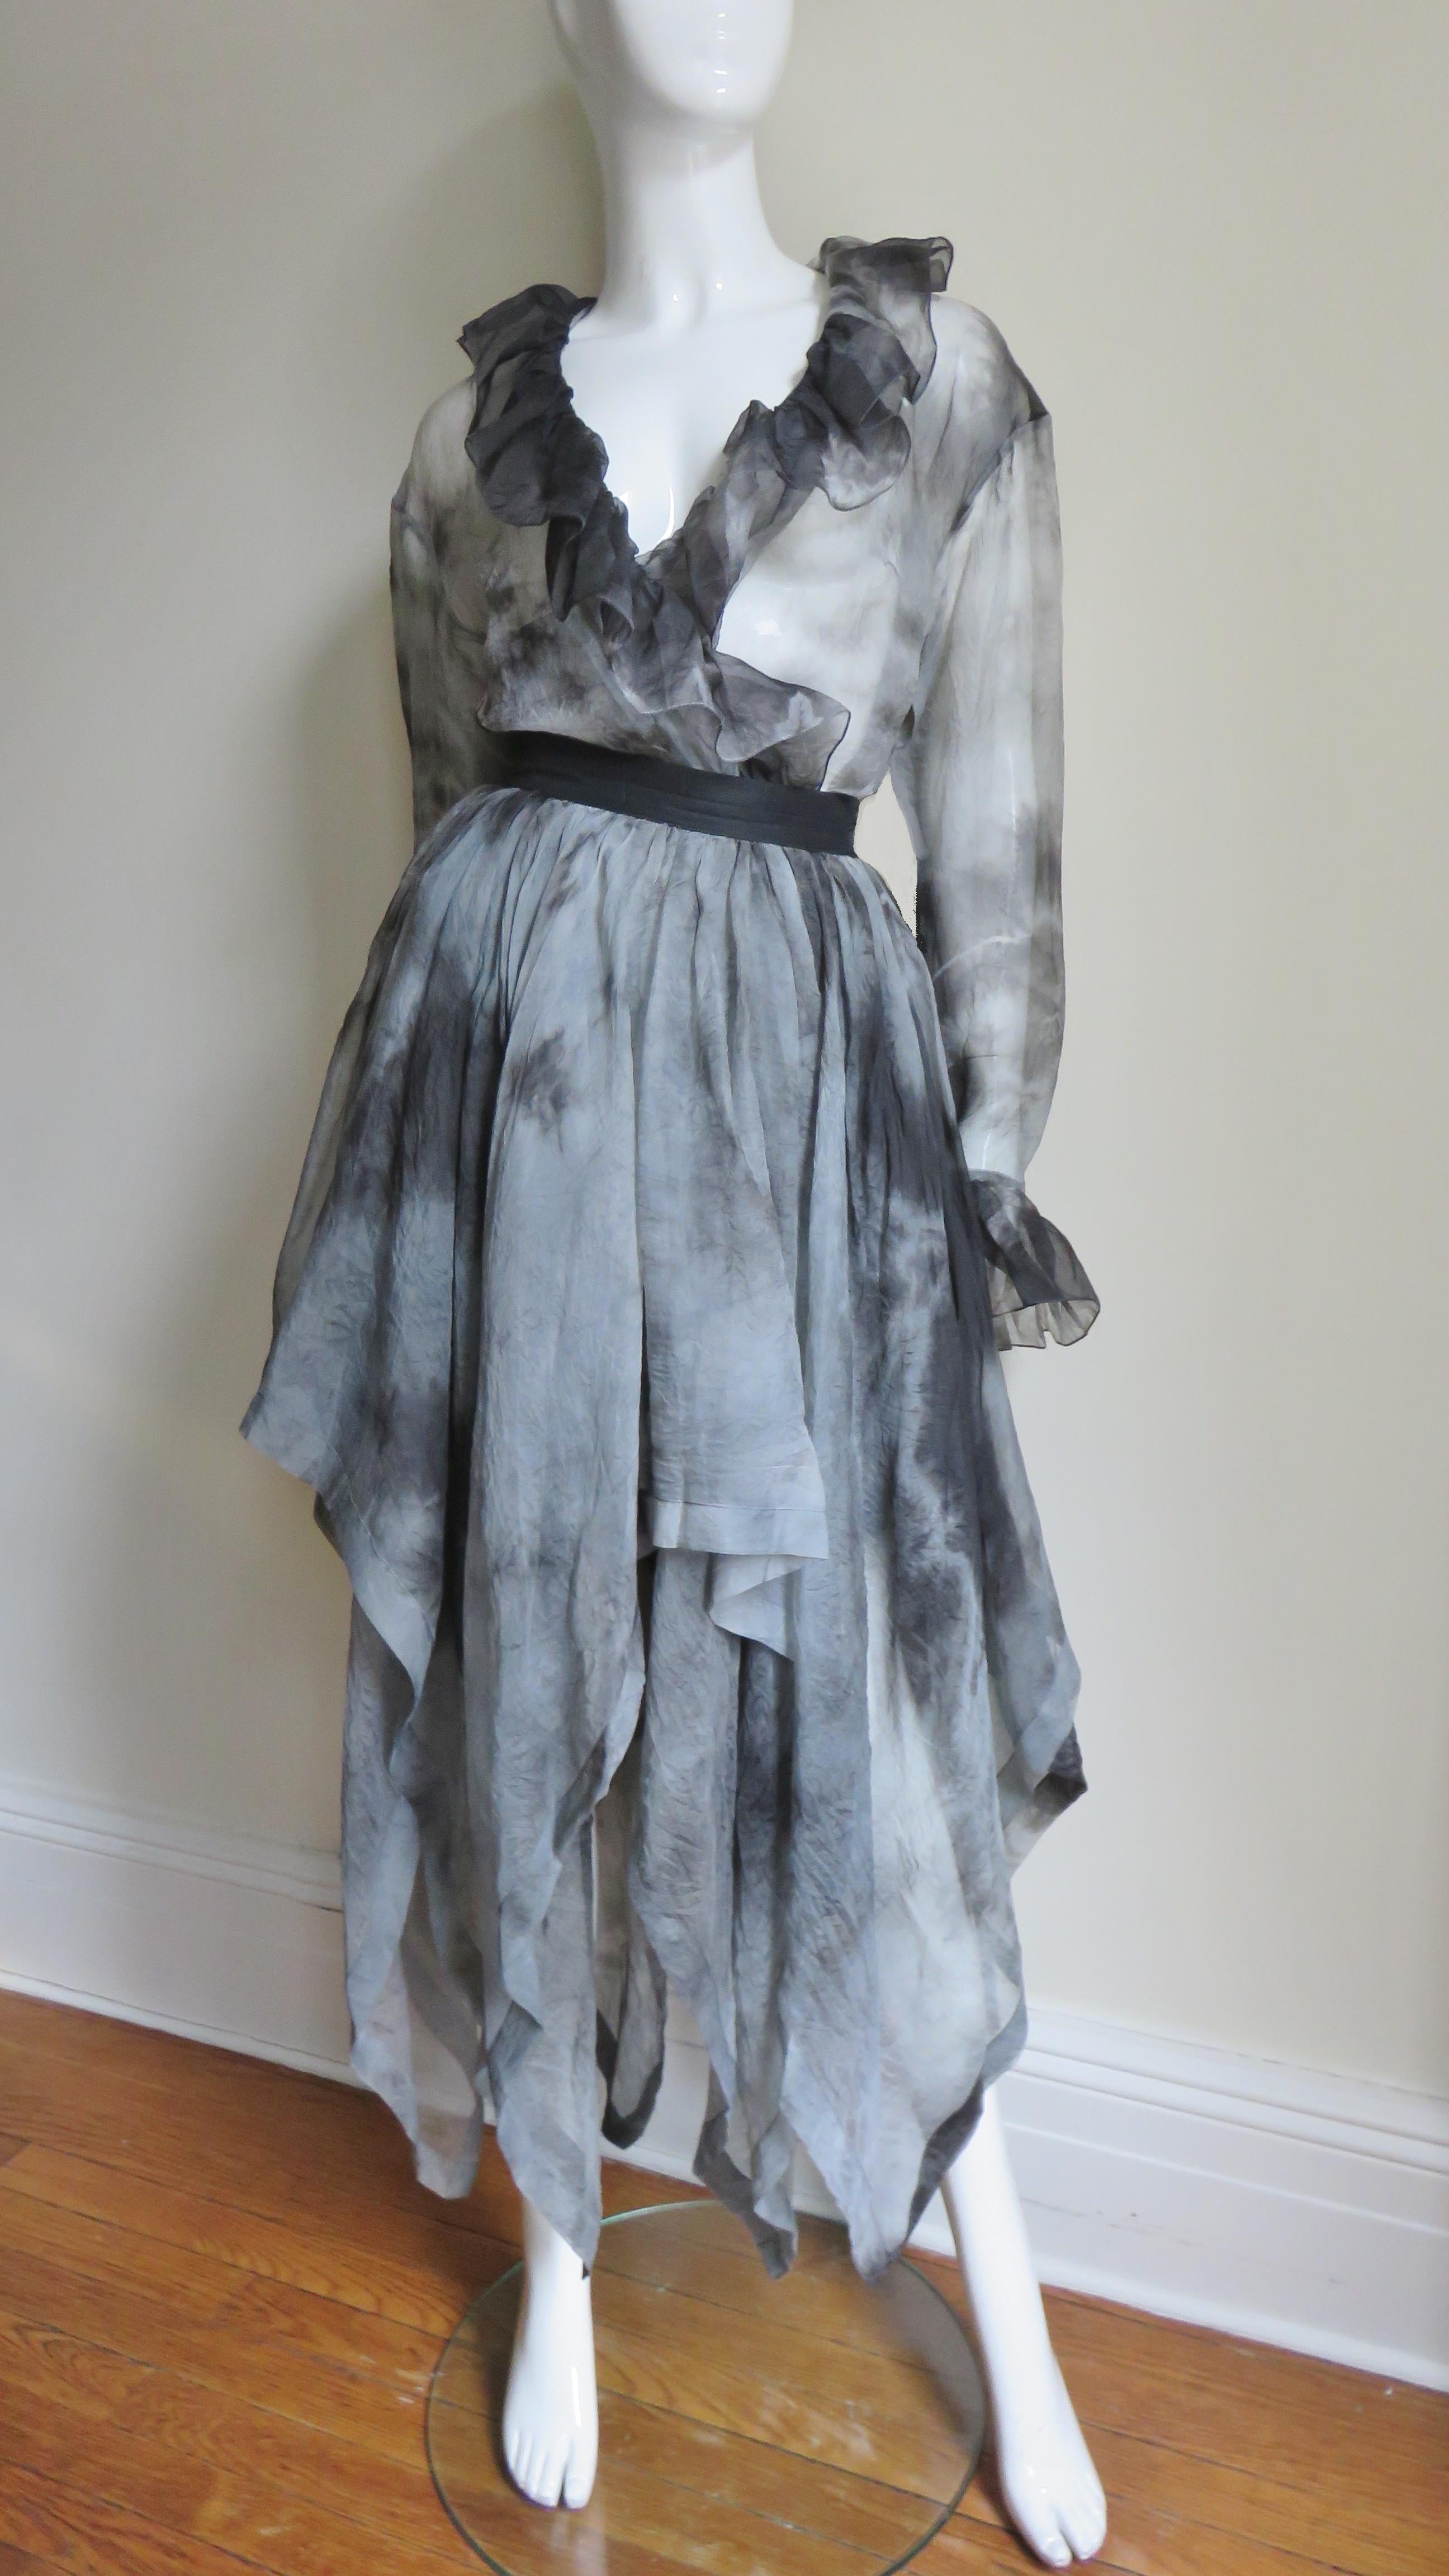 A fabulous semi sheer silk organza skirt and top set from Workers For Freedom, London in mint grey and black tie dye pattern.  The long top has a ruffle around the neck and the burnished dark grey metal button cuffs. Two skewed layers of skirt with